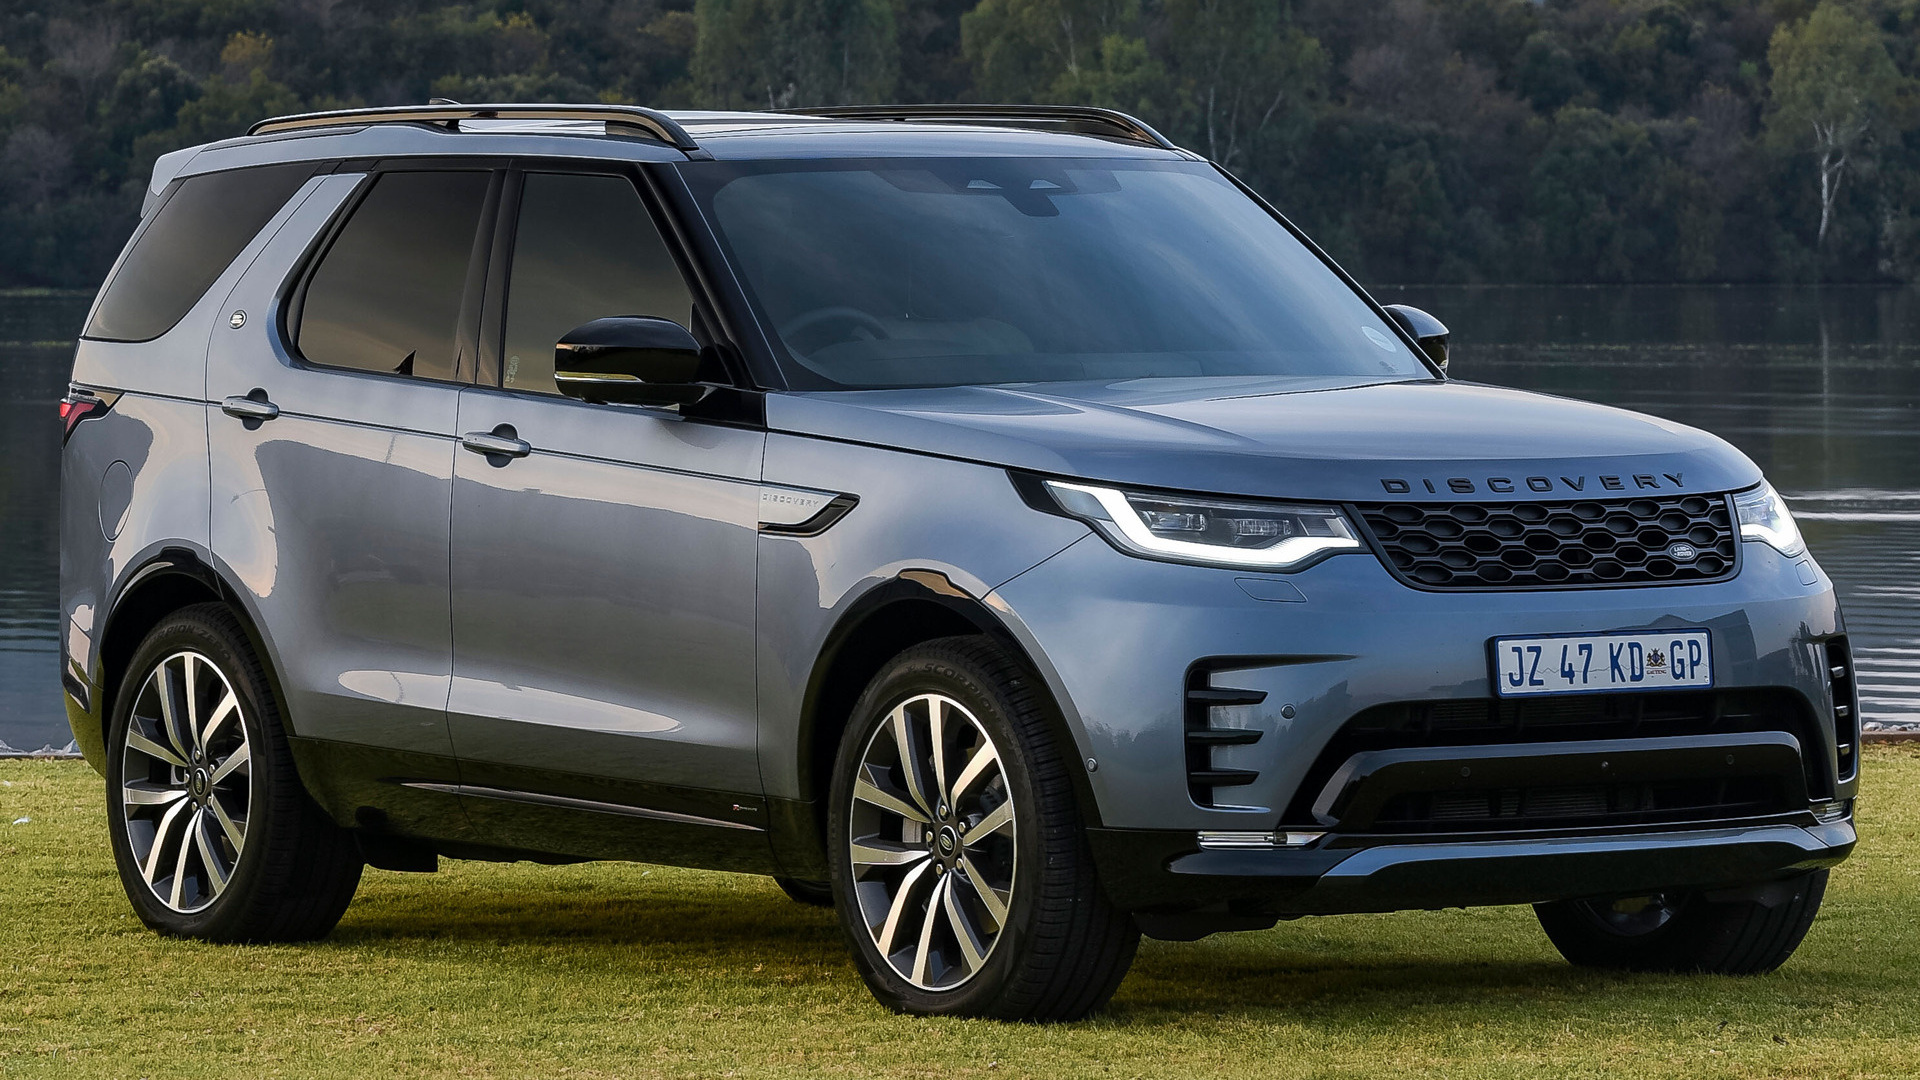 Land Rover Discovery, Auto industry, 2021 model, Car pixel, 1920x1080 Full HD Desktop